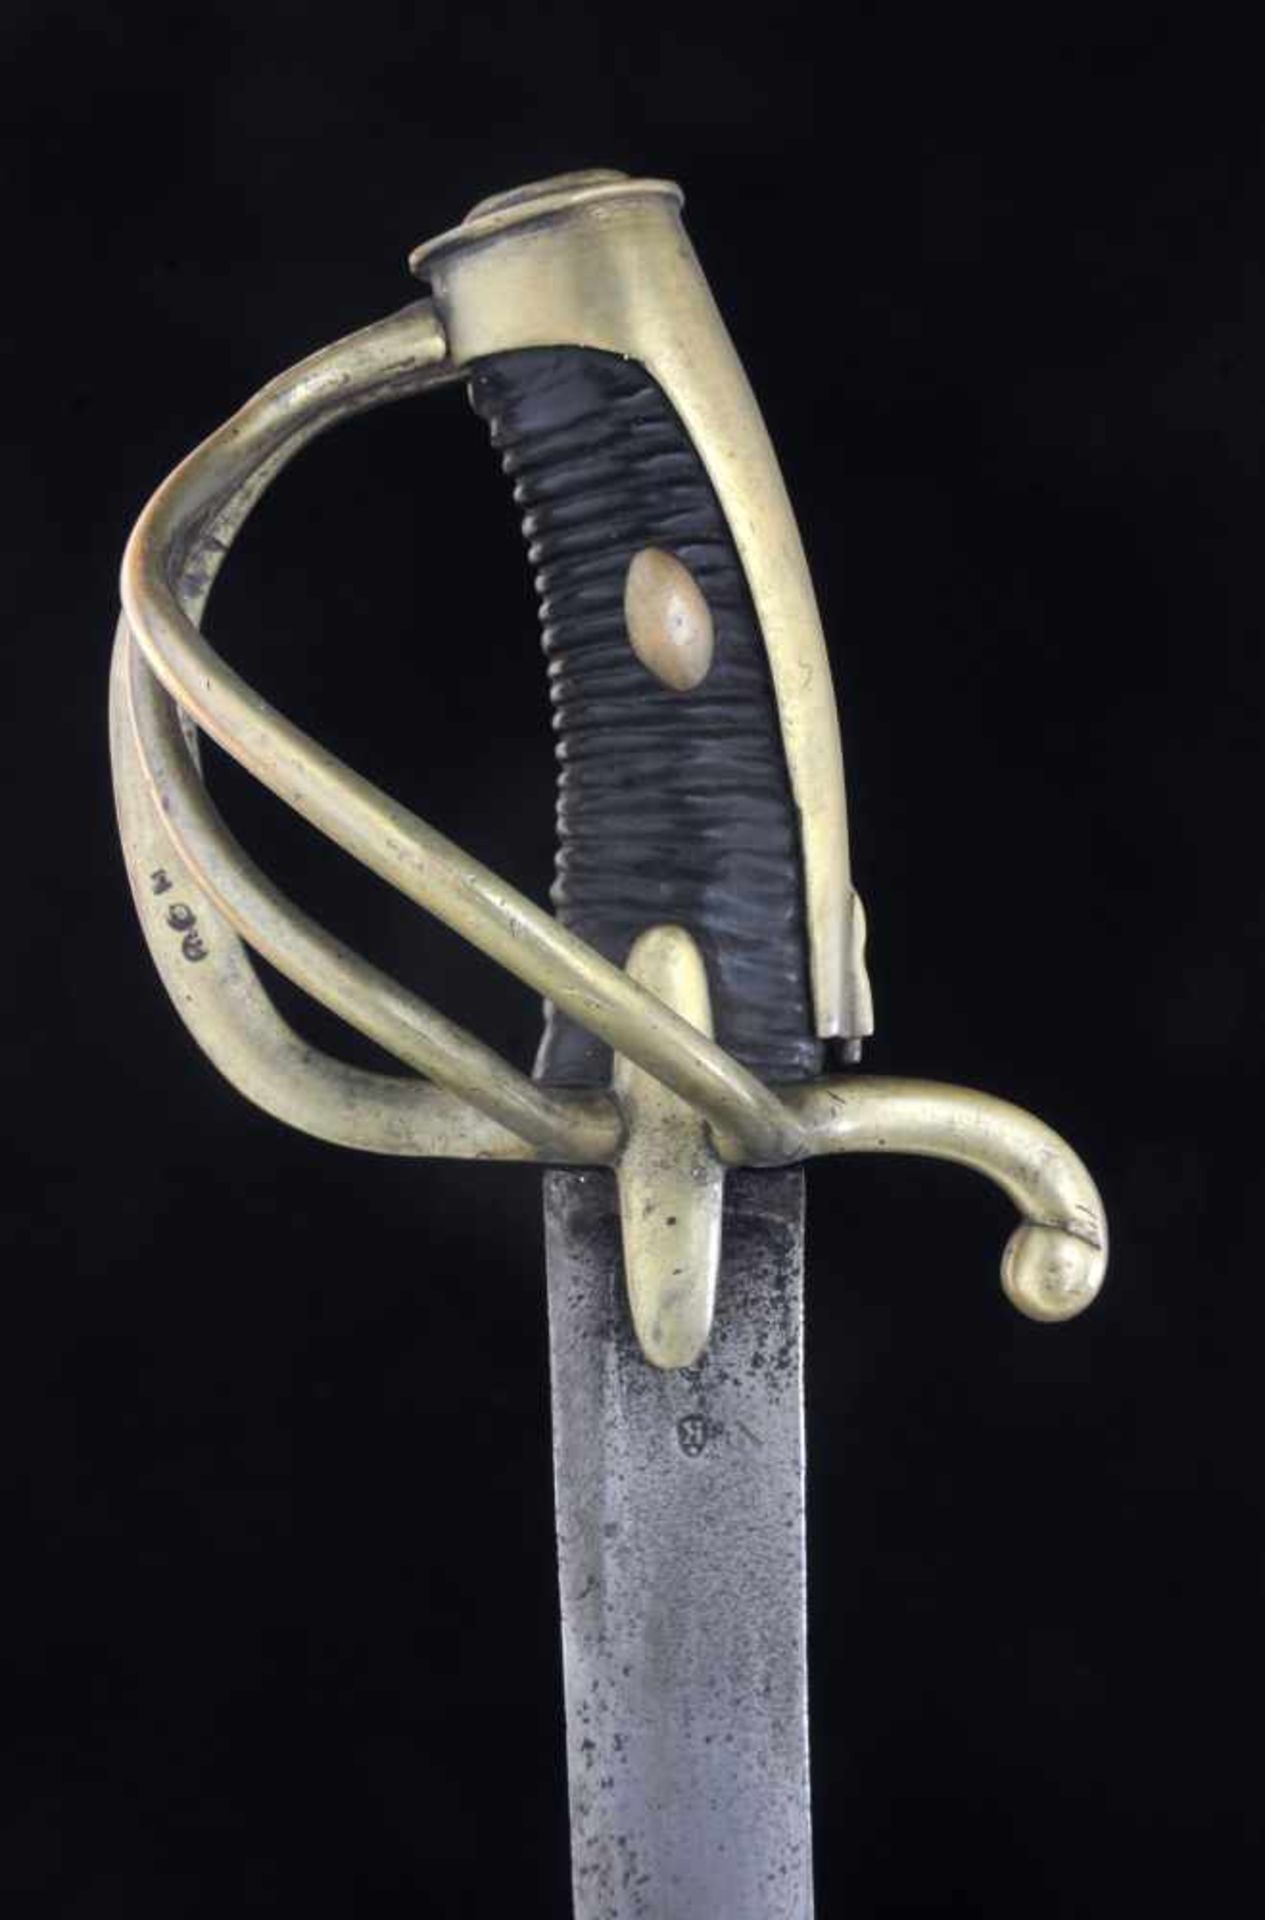 A FRENCH AN XI LIGHT CAVALRY TROOPER'S SWORD, NAPOLEON ARMY. FRANCE, EARLY 19TH CENTURY, EMPIRE - Bild 15 aus 17